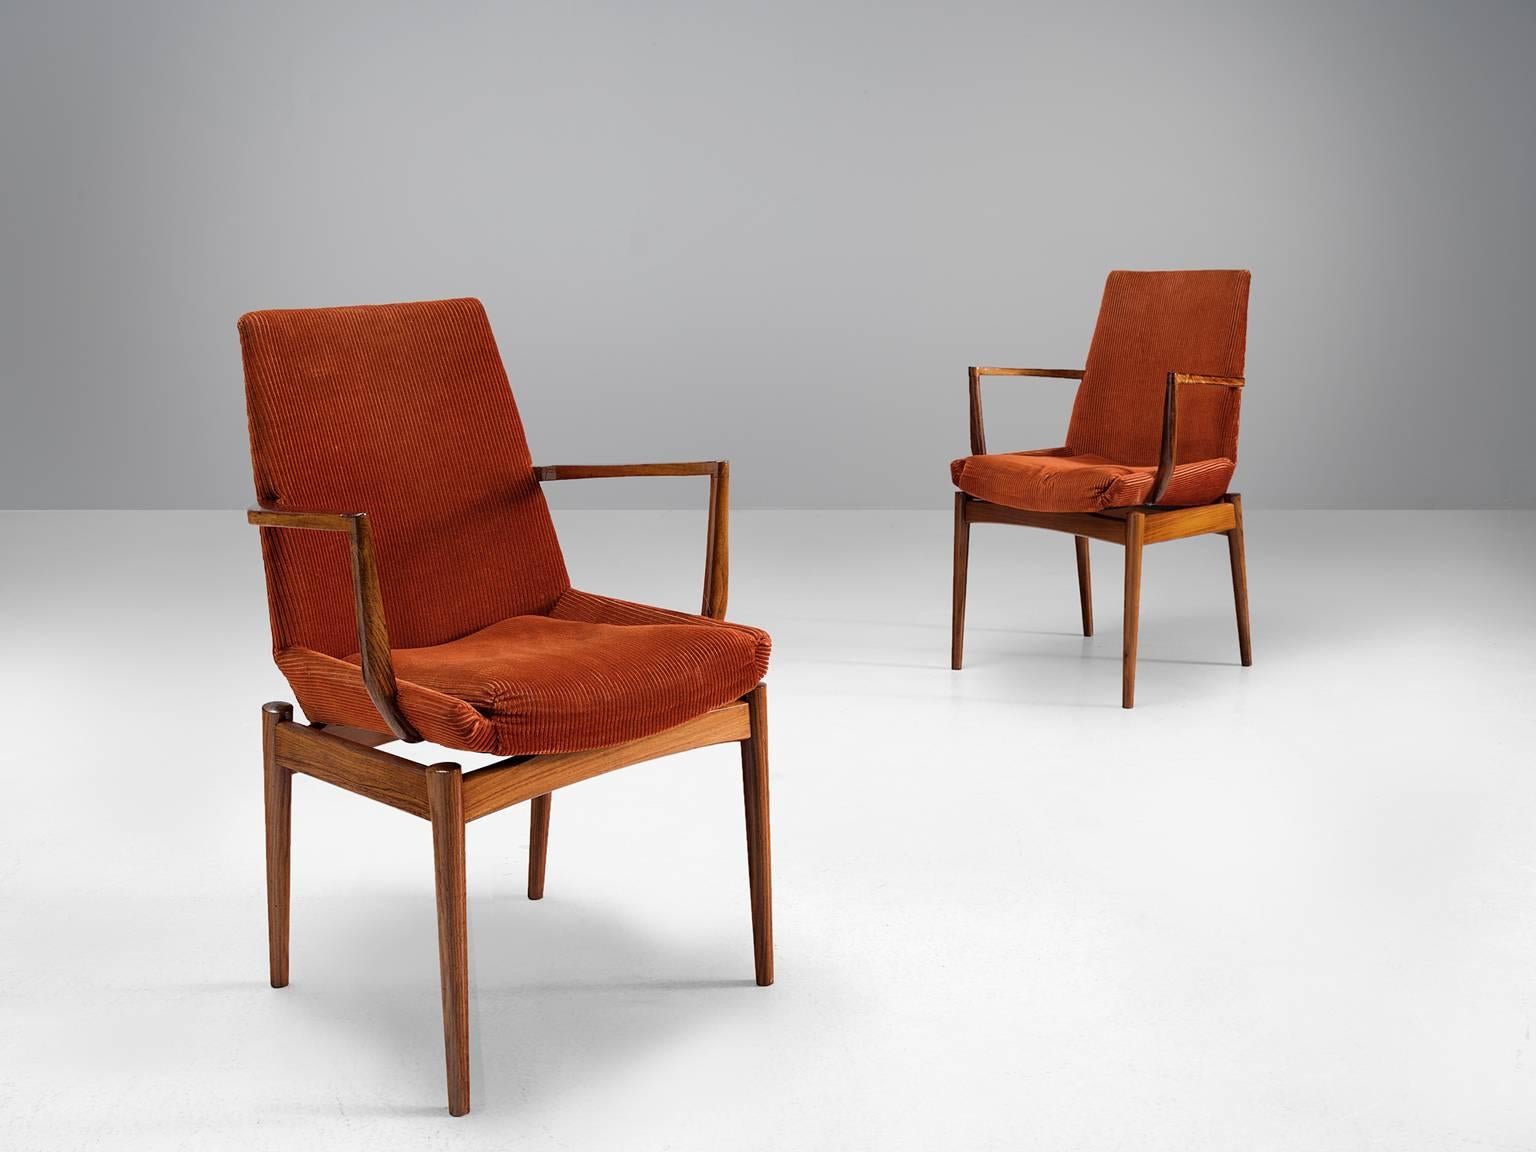 Set of two side chairs, rosewood, red orange corduroy, Scandinavia, circa 1955.

The set of two chairs is sensuous, sculptural and elegant. The chairs feature high backs, and dramatically high and sculpted armrests. The curved, tapered legs are